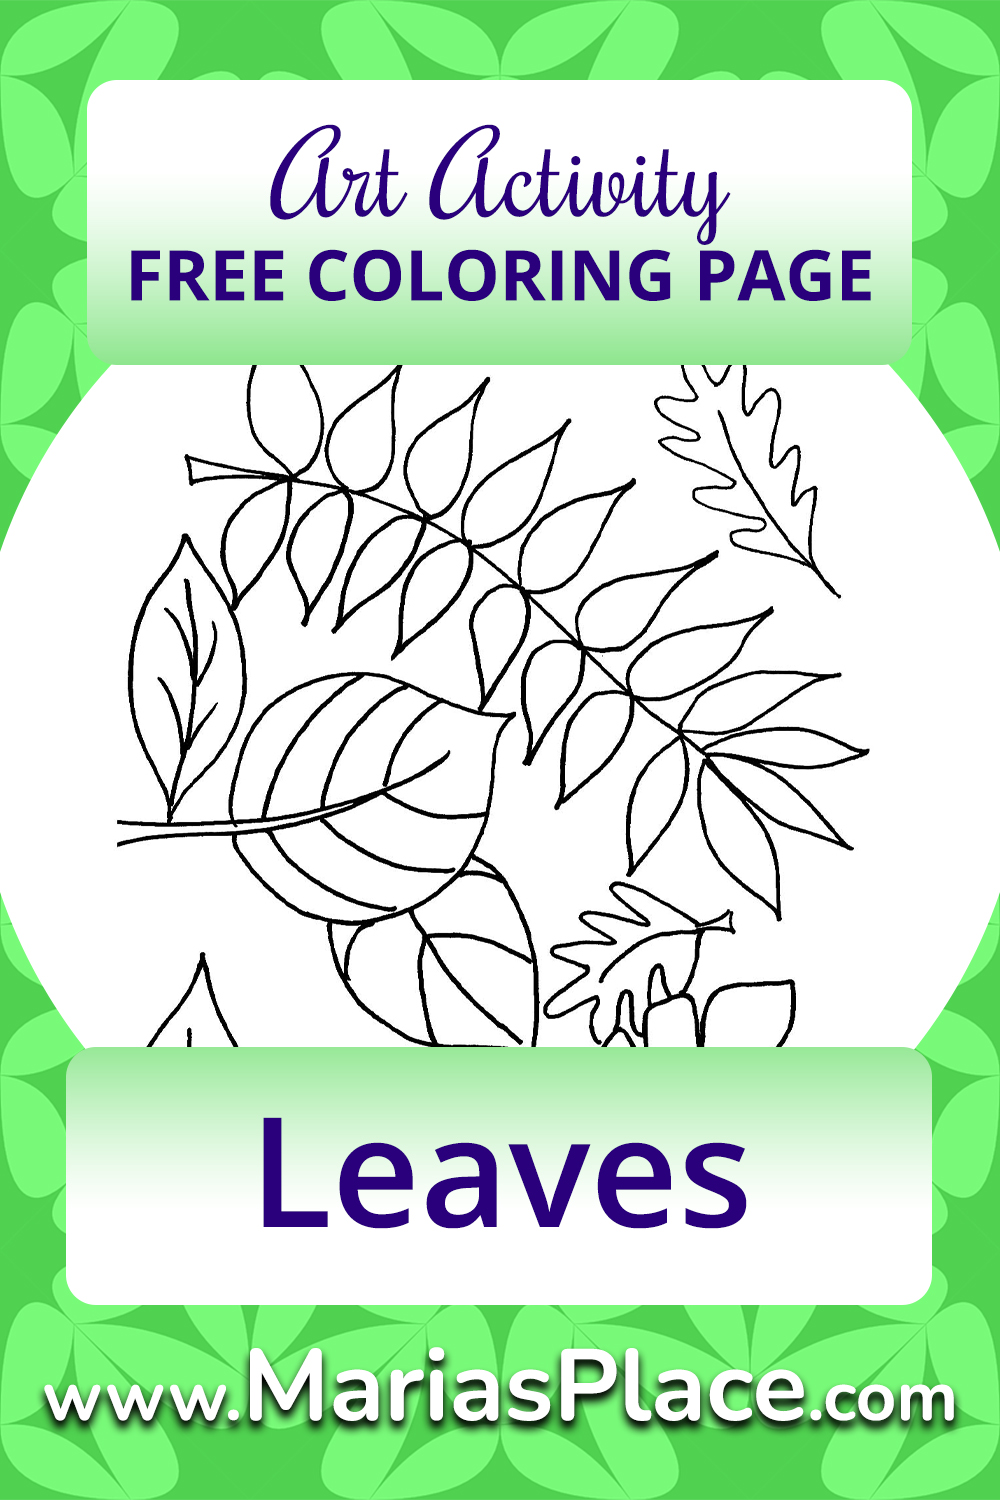 Coloring – Leaves